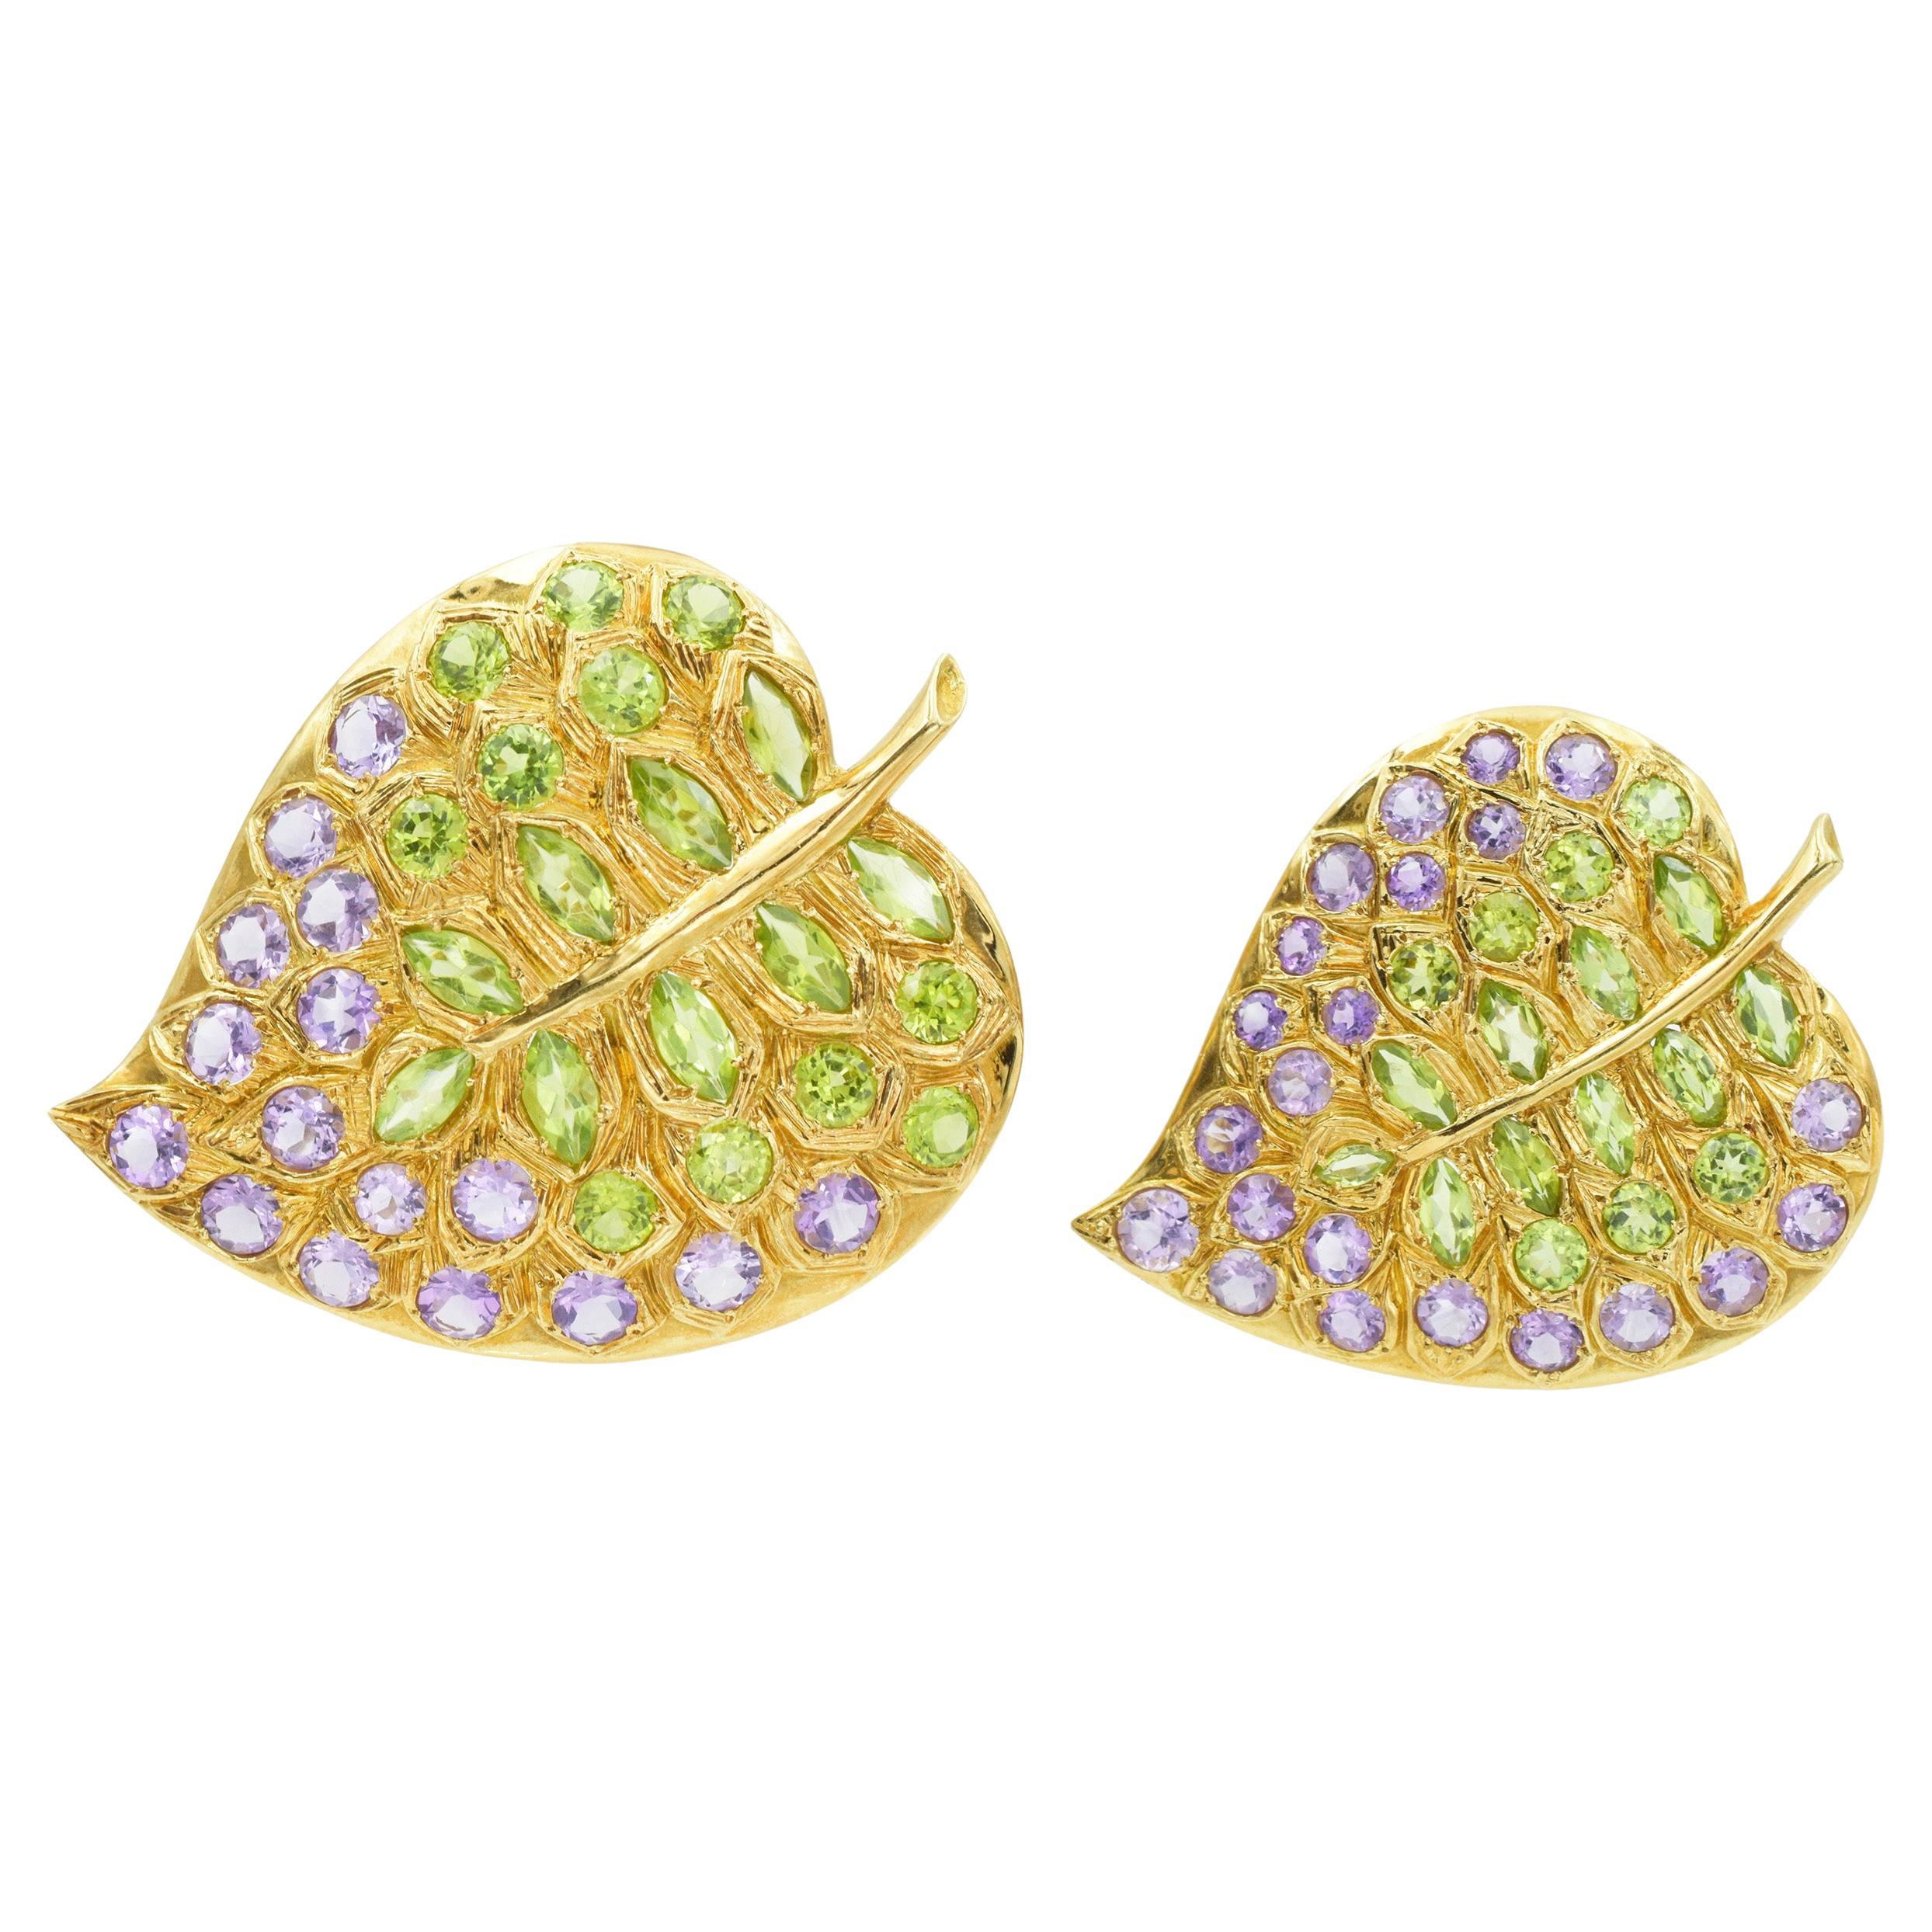 Pair of Amethyst and Peridot Leaf Brooches